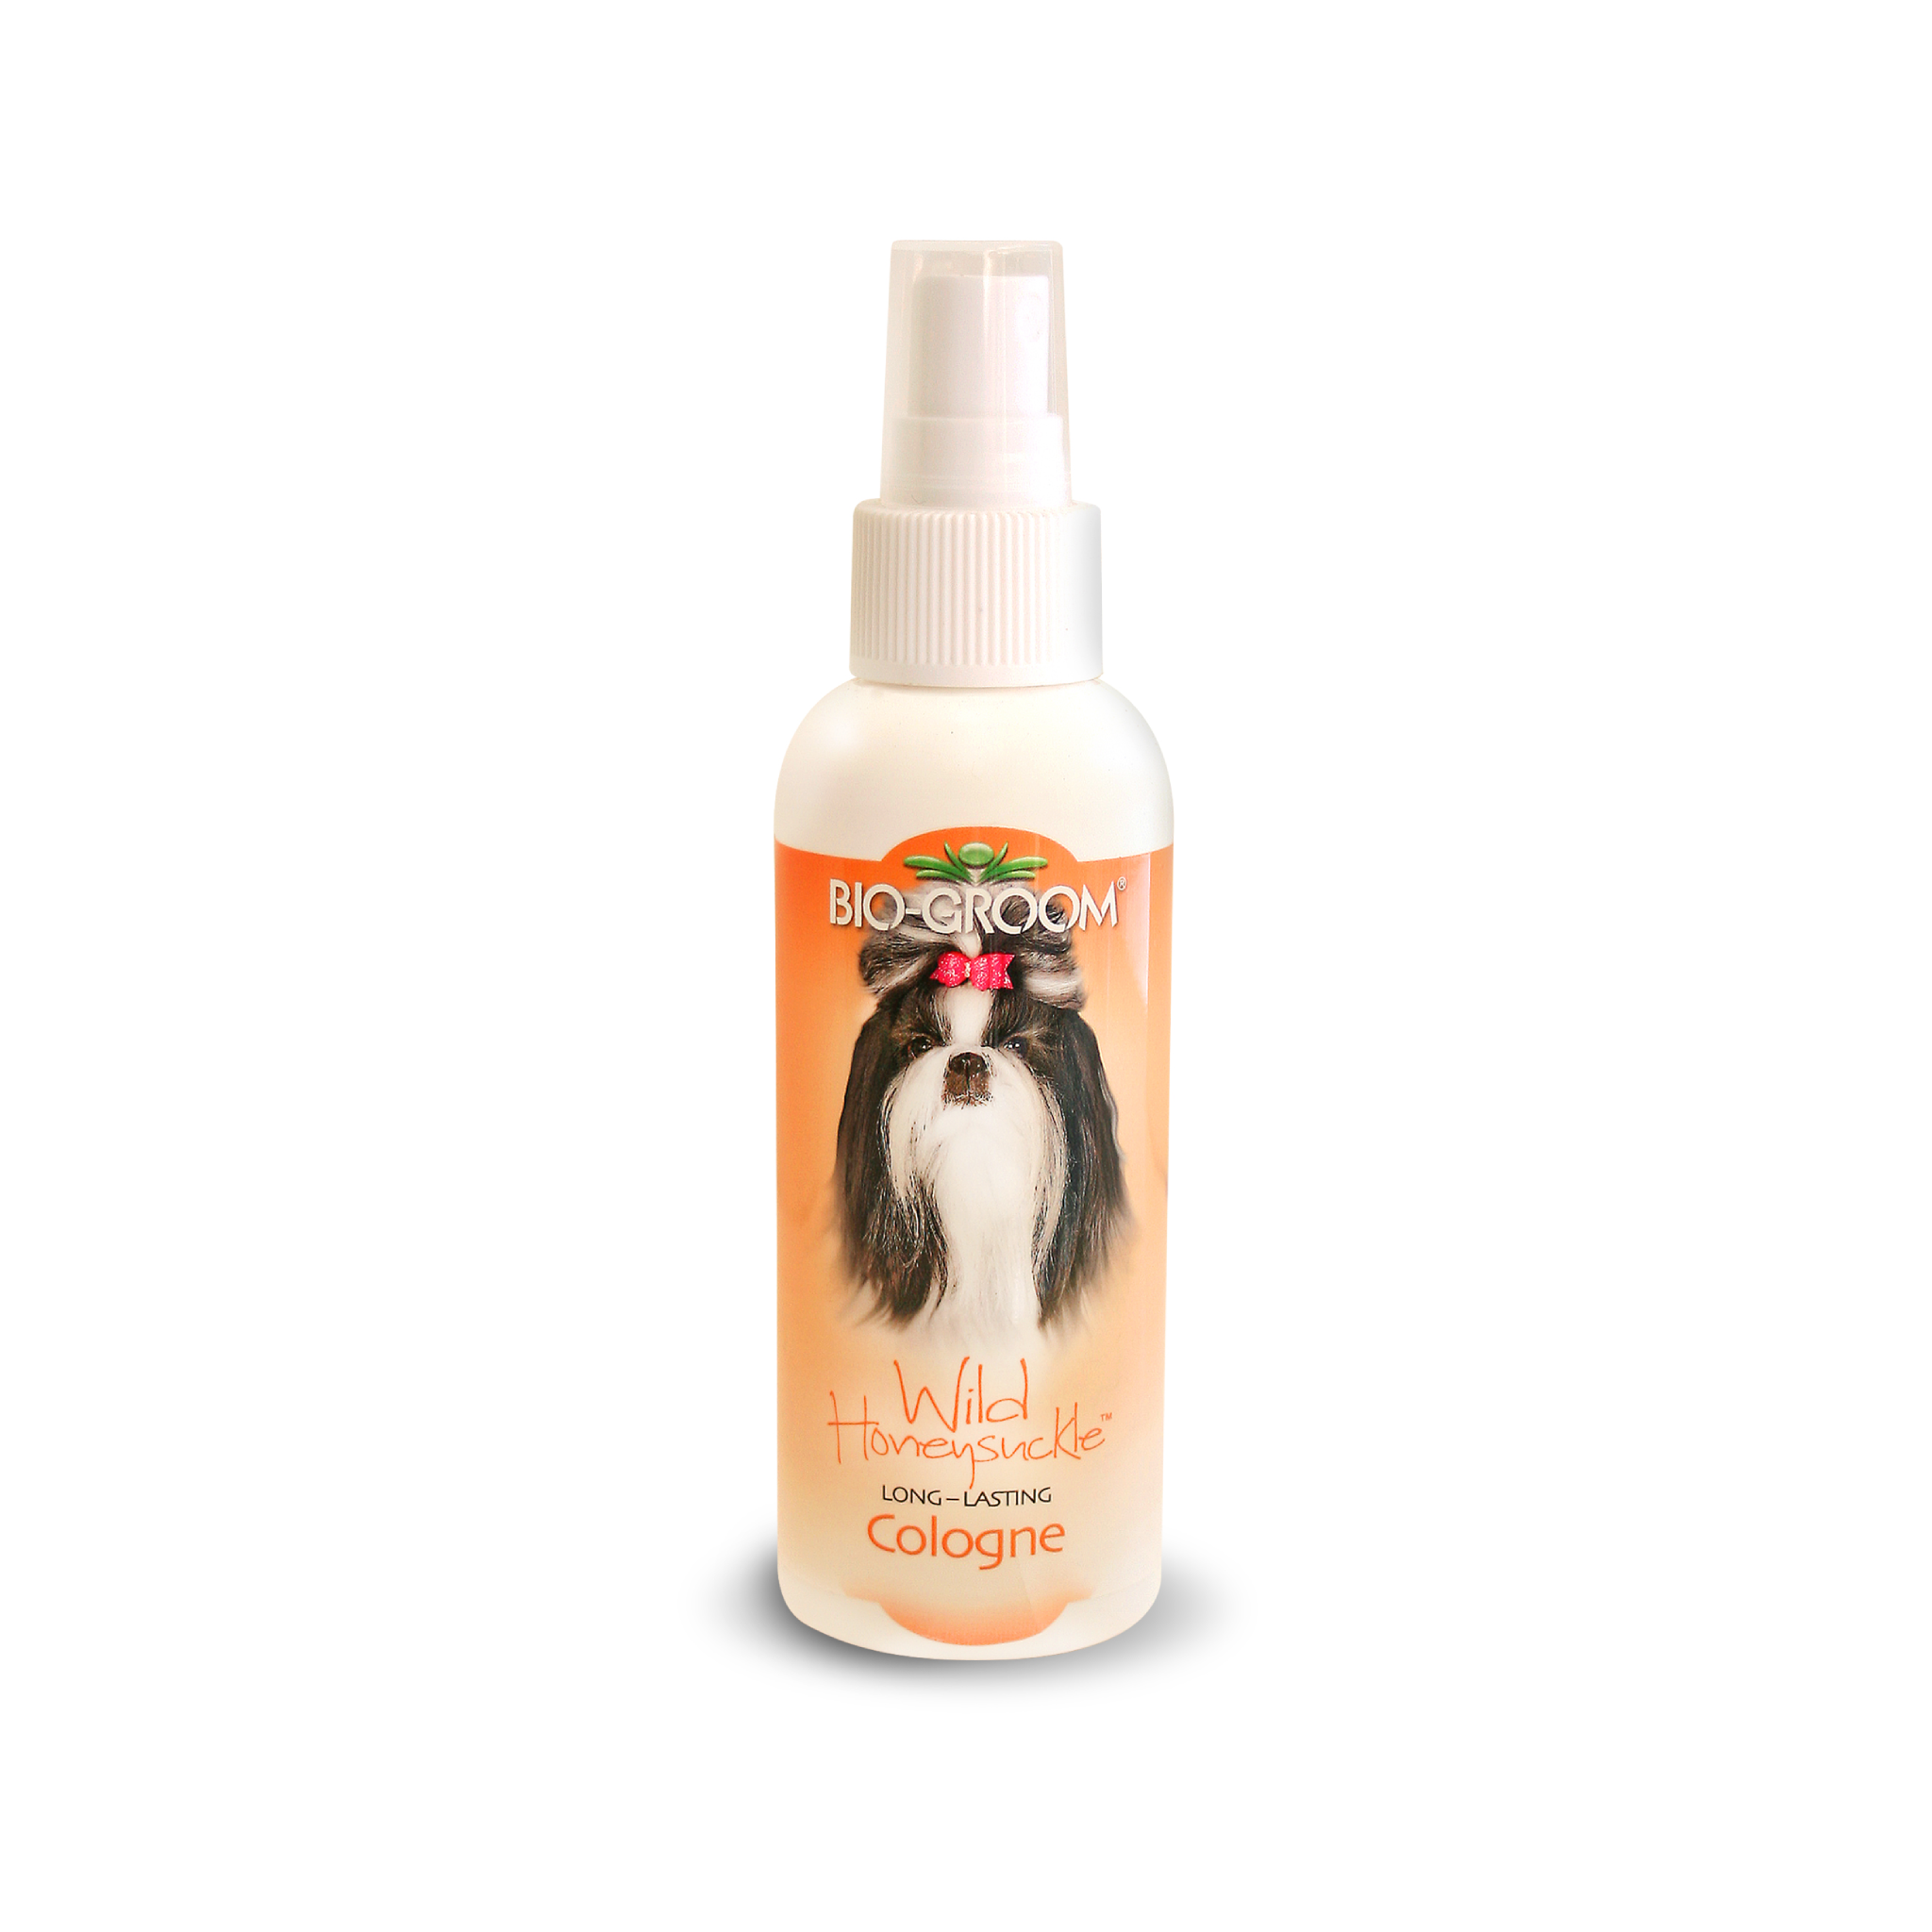 Biogroom Wild Honeysuckle fragrance infused cologne for dogs and cat